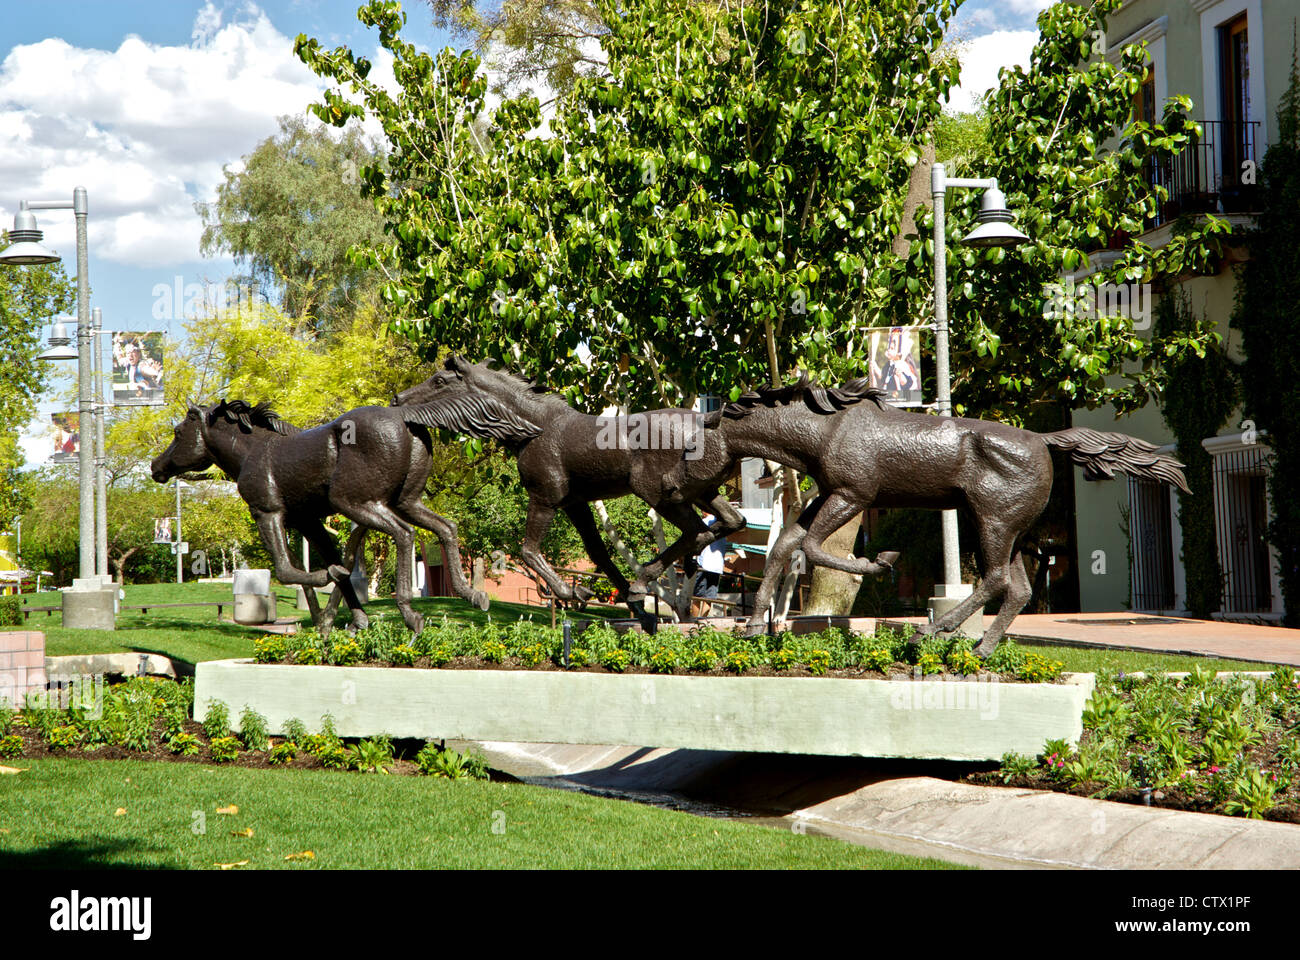 Cast bronze sculpture horses Main Street Civic Square Old Town Scottsdale downtown Historic District Stock Photo